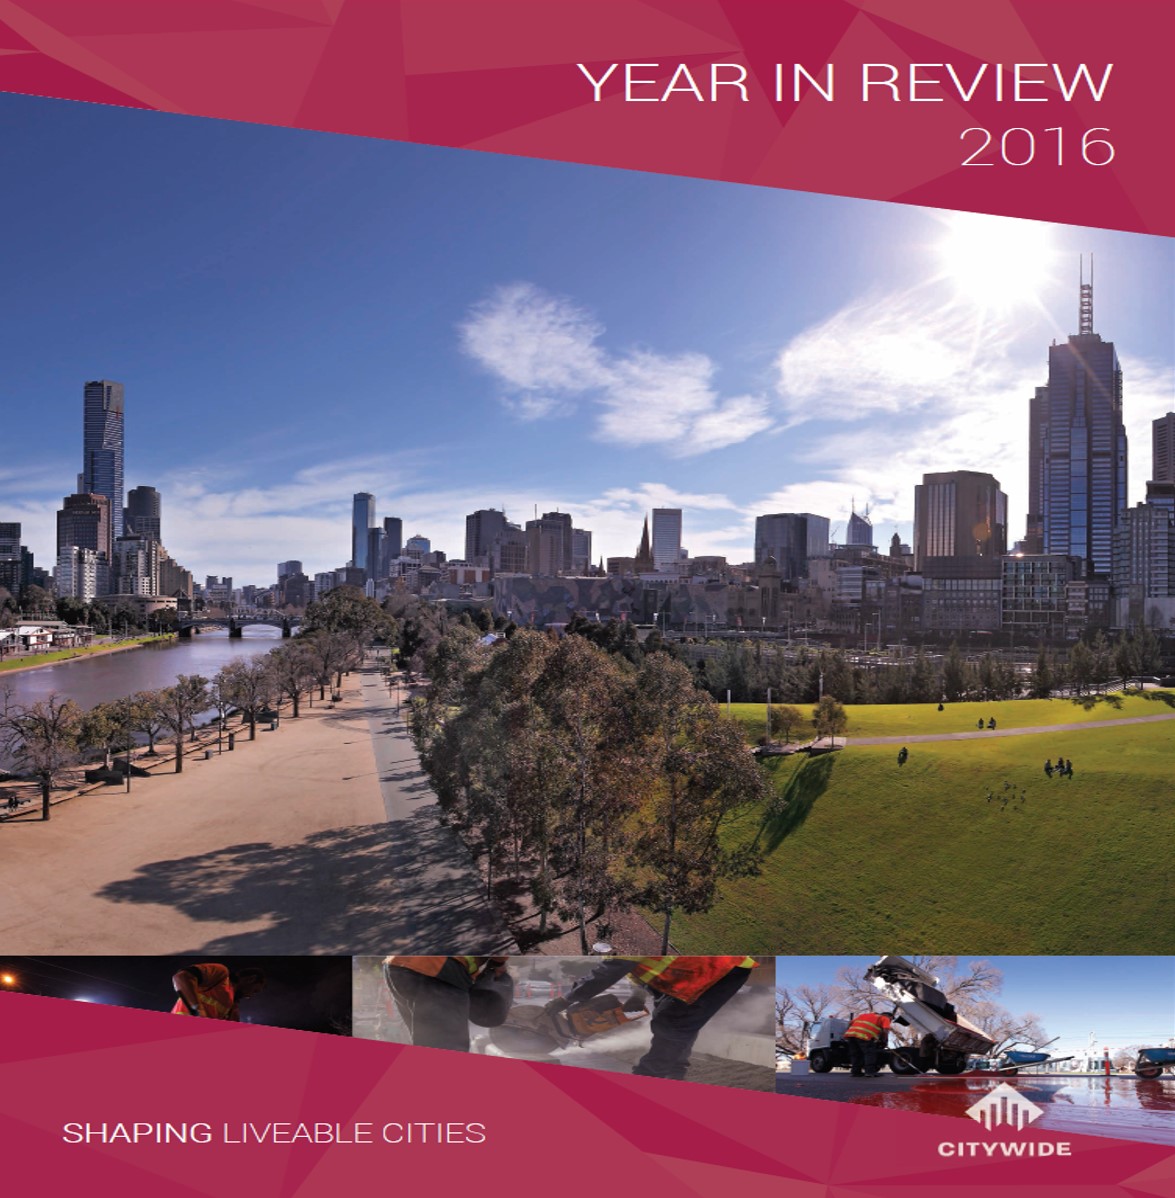 Citywide 2016 Annual Report